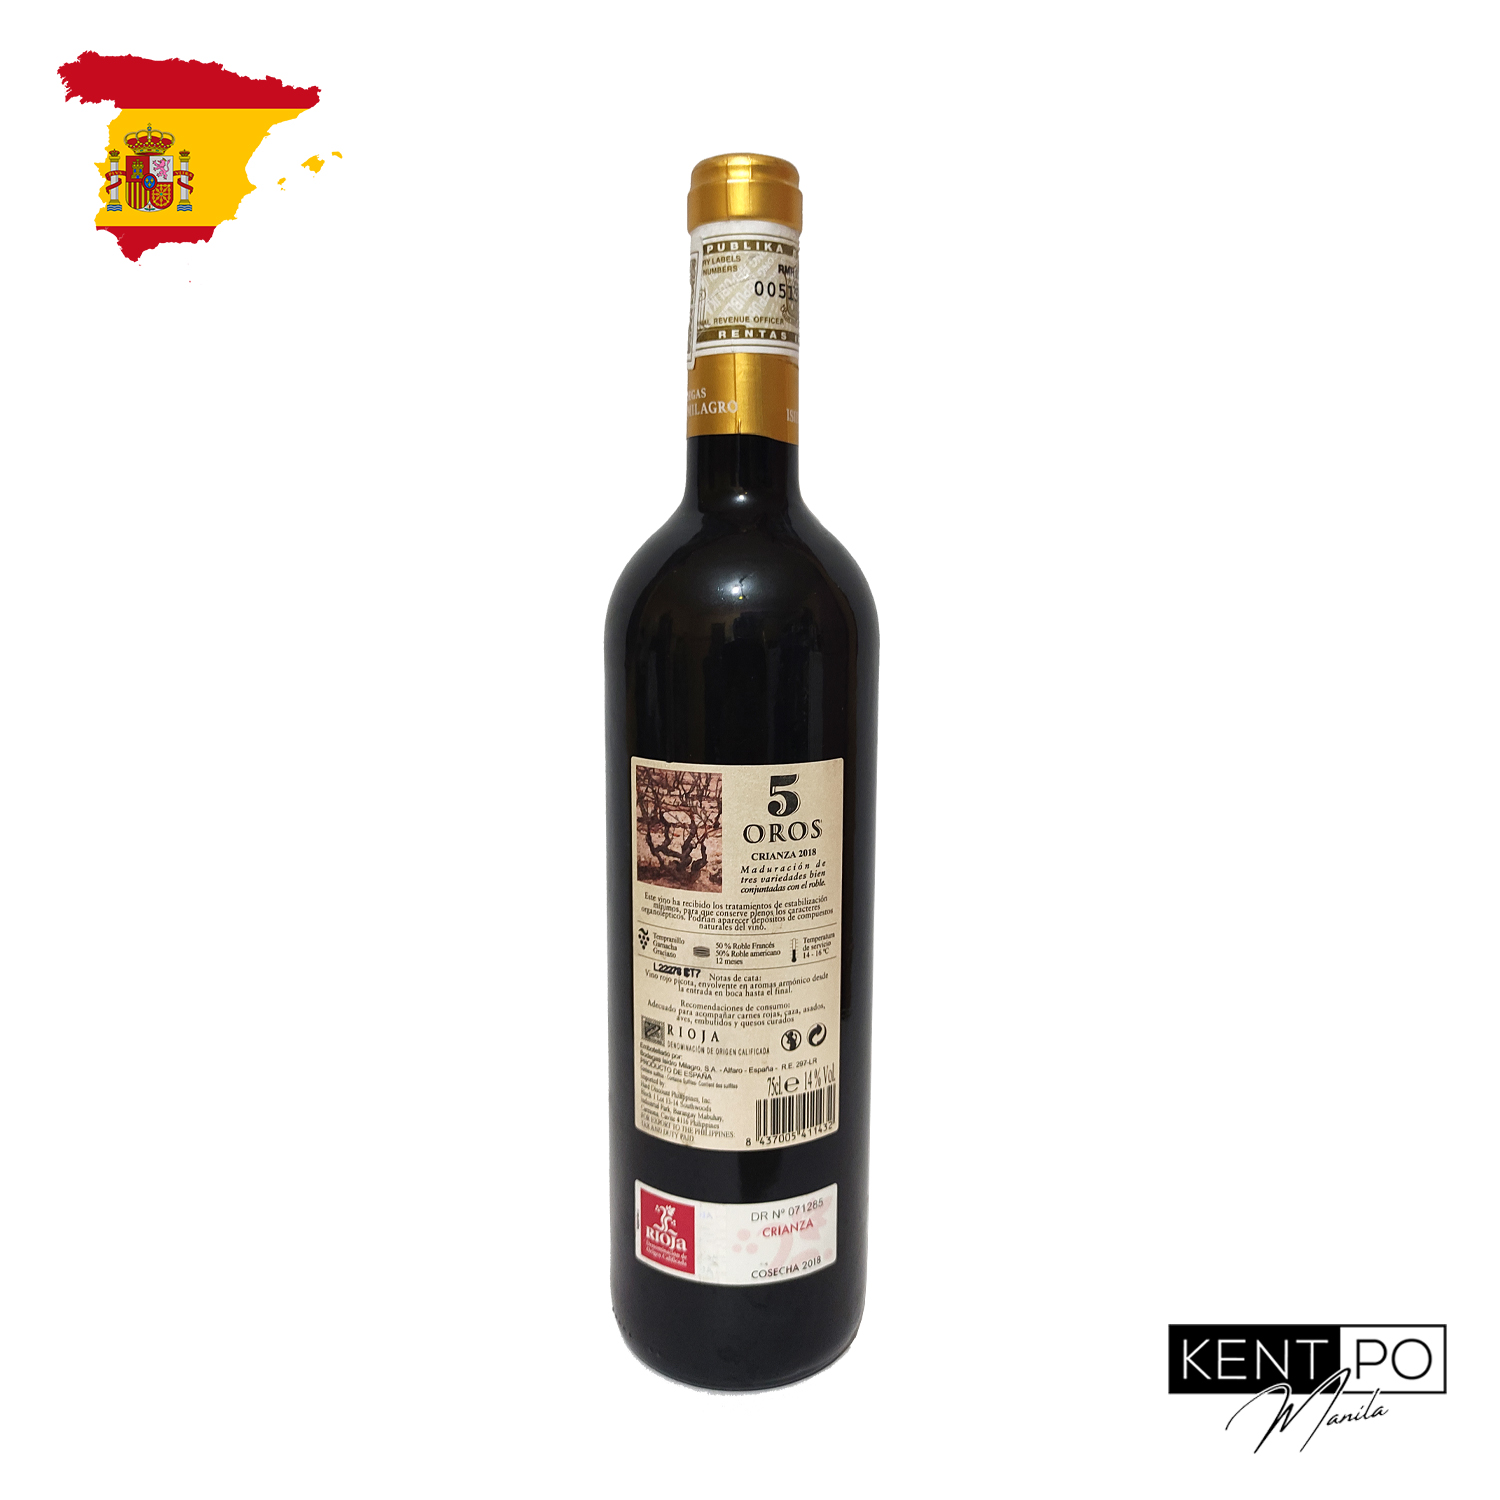 SPAIN BODEGAS 2018 Lazada IMPORTED WINE MILAGRO PRODUCT OF PH OROS CRIANZA RED 75cl ISIDRO | 5